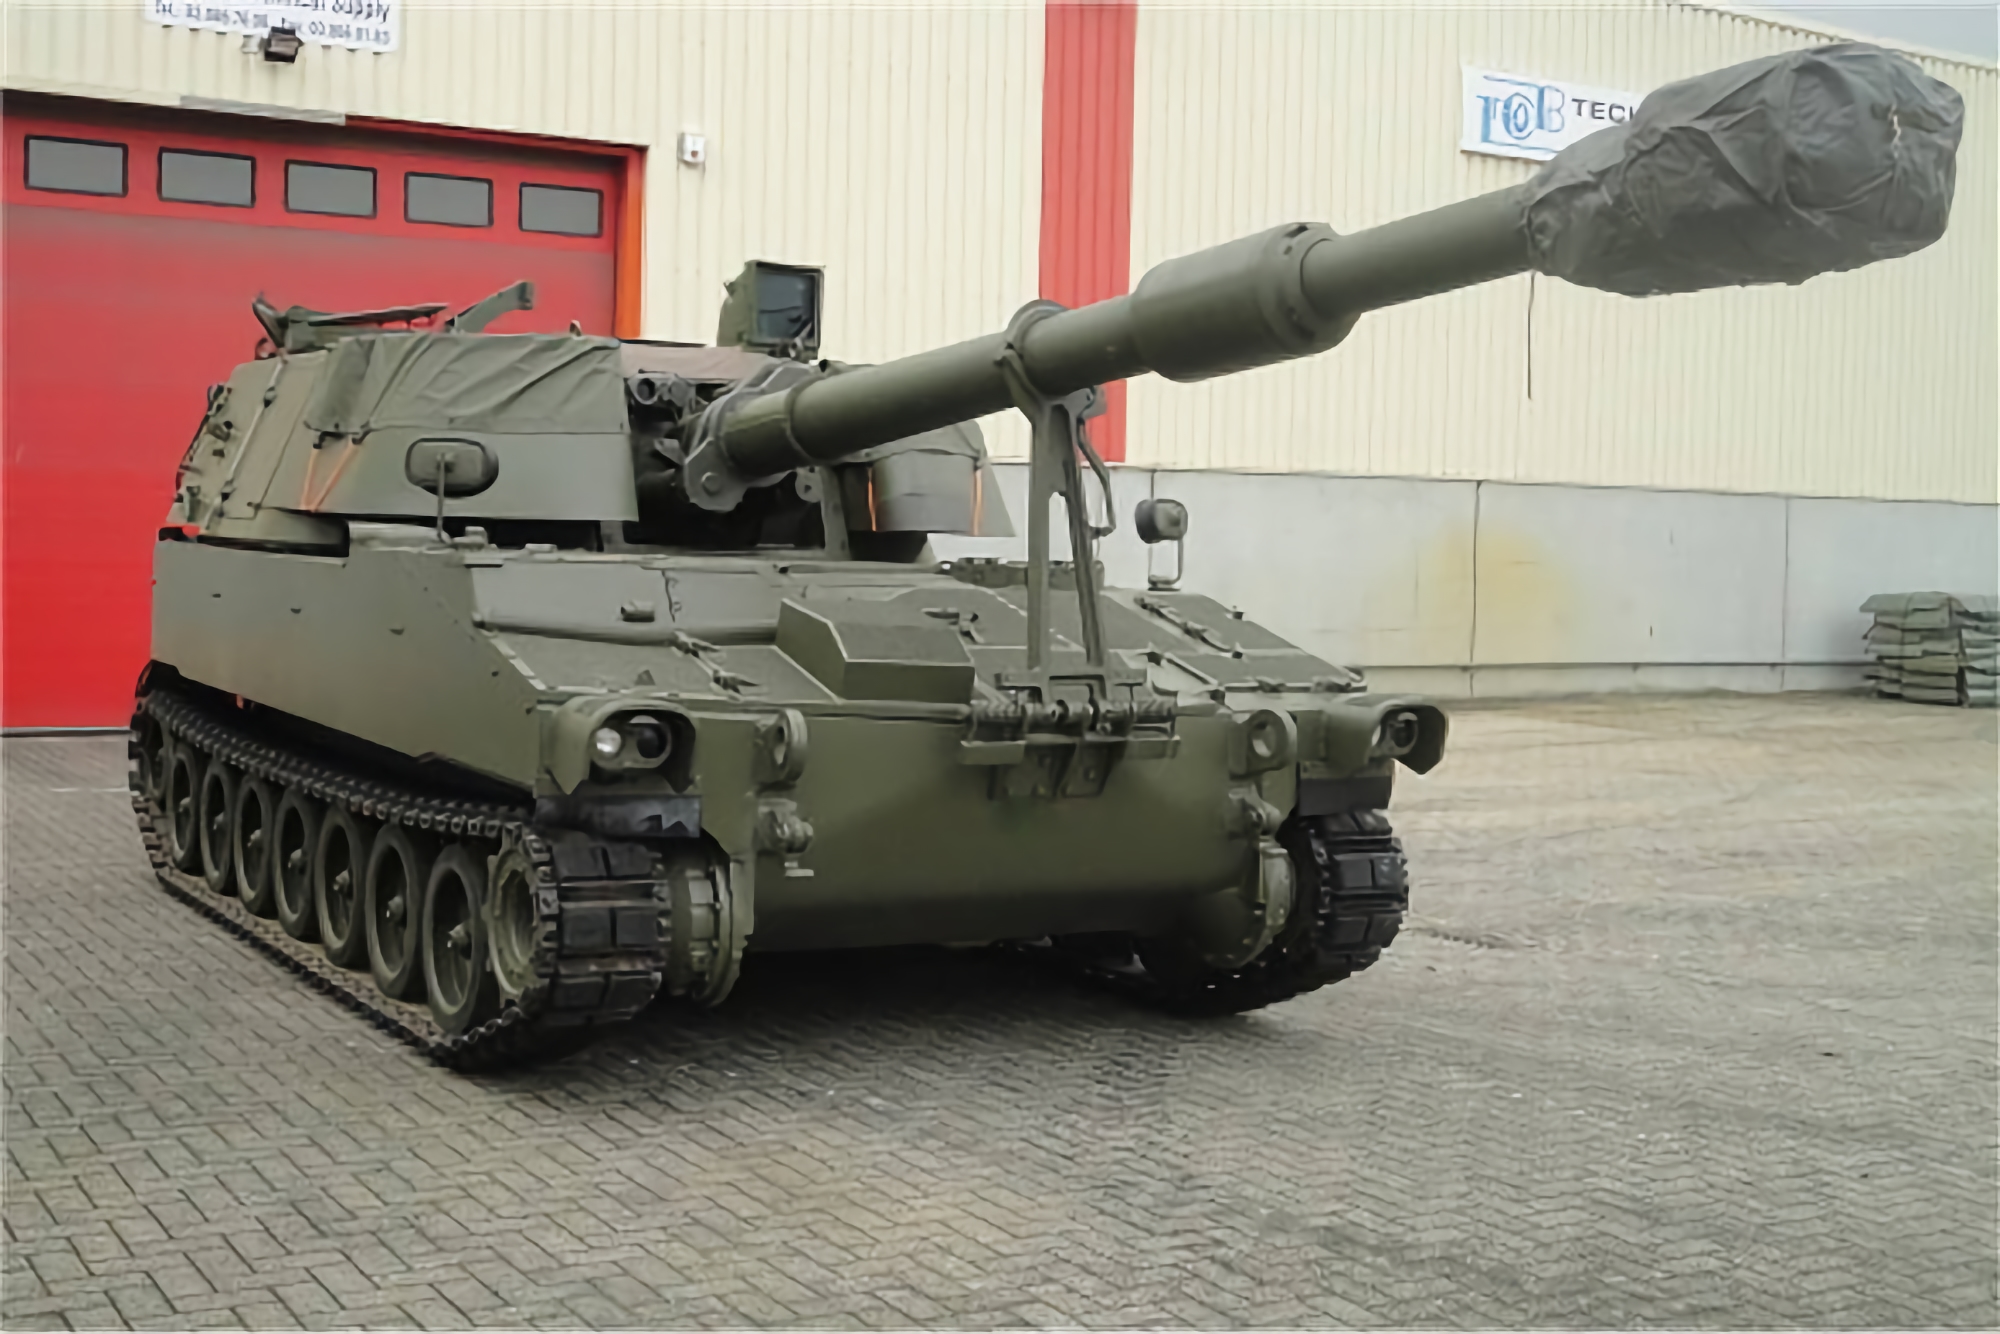 The UK bought and repaired more than 20 M109 self-propelled guns: now they are being sent to Ukraine